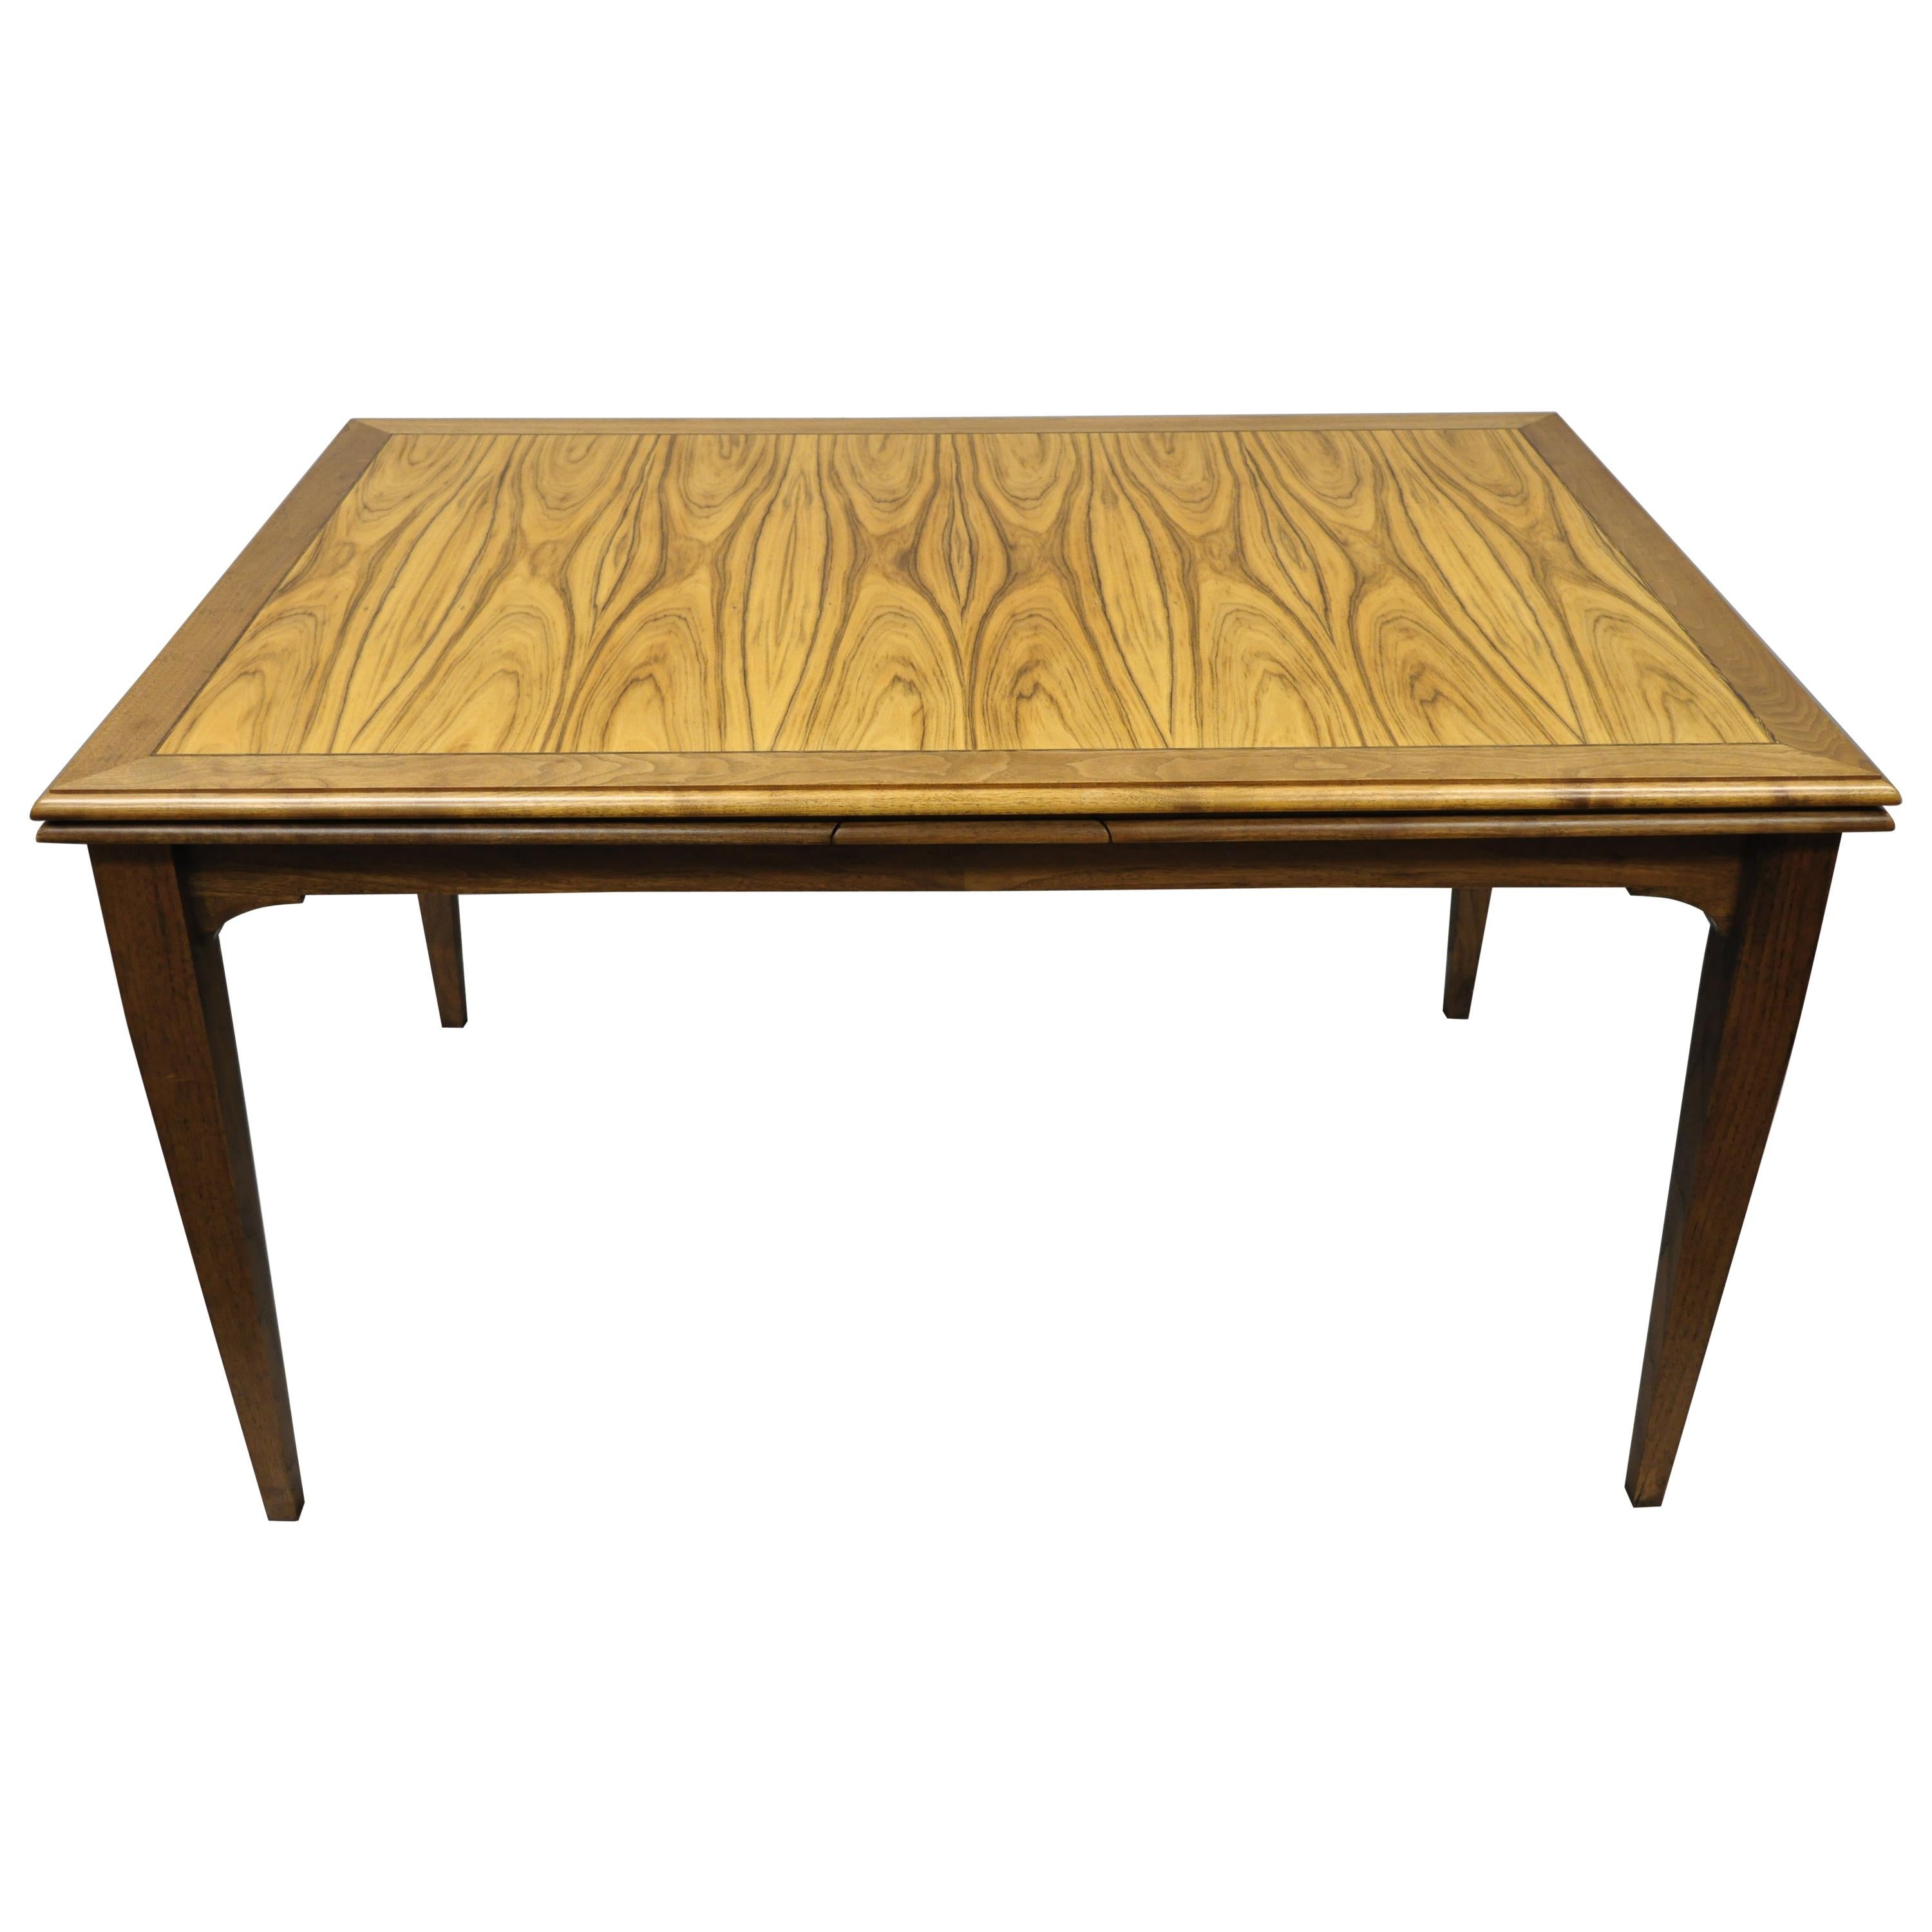 Rosewood Danish Mid-Century Modern Style Extension Dining Table by Paul Downs For Sale